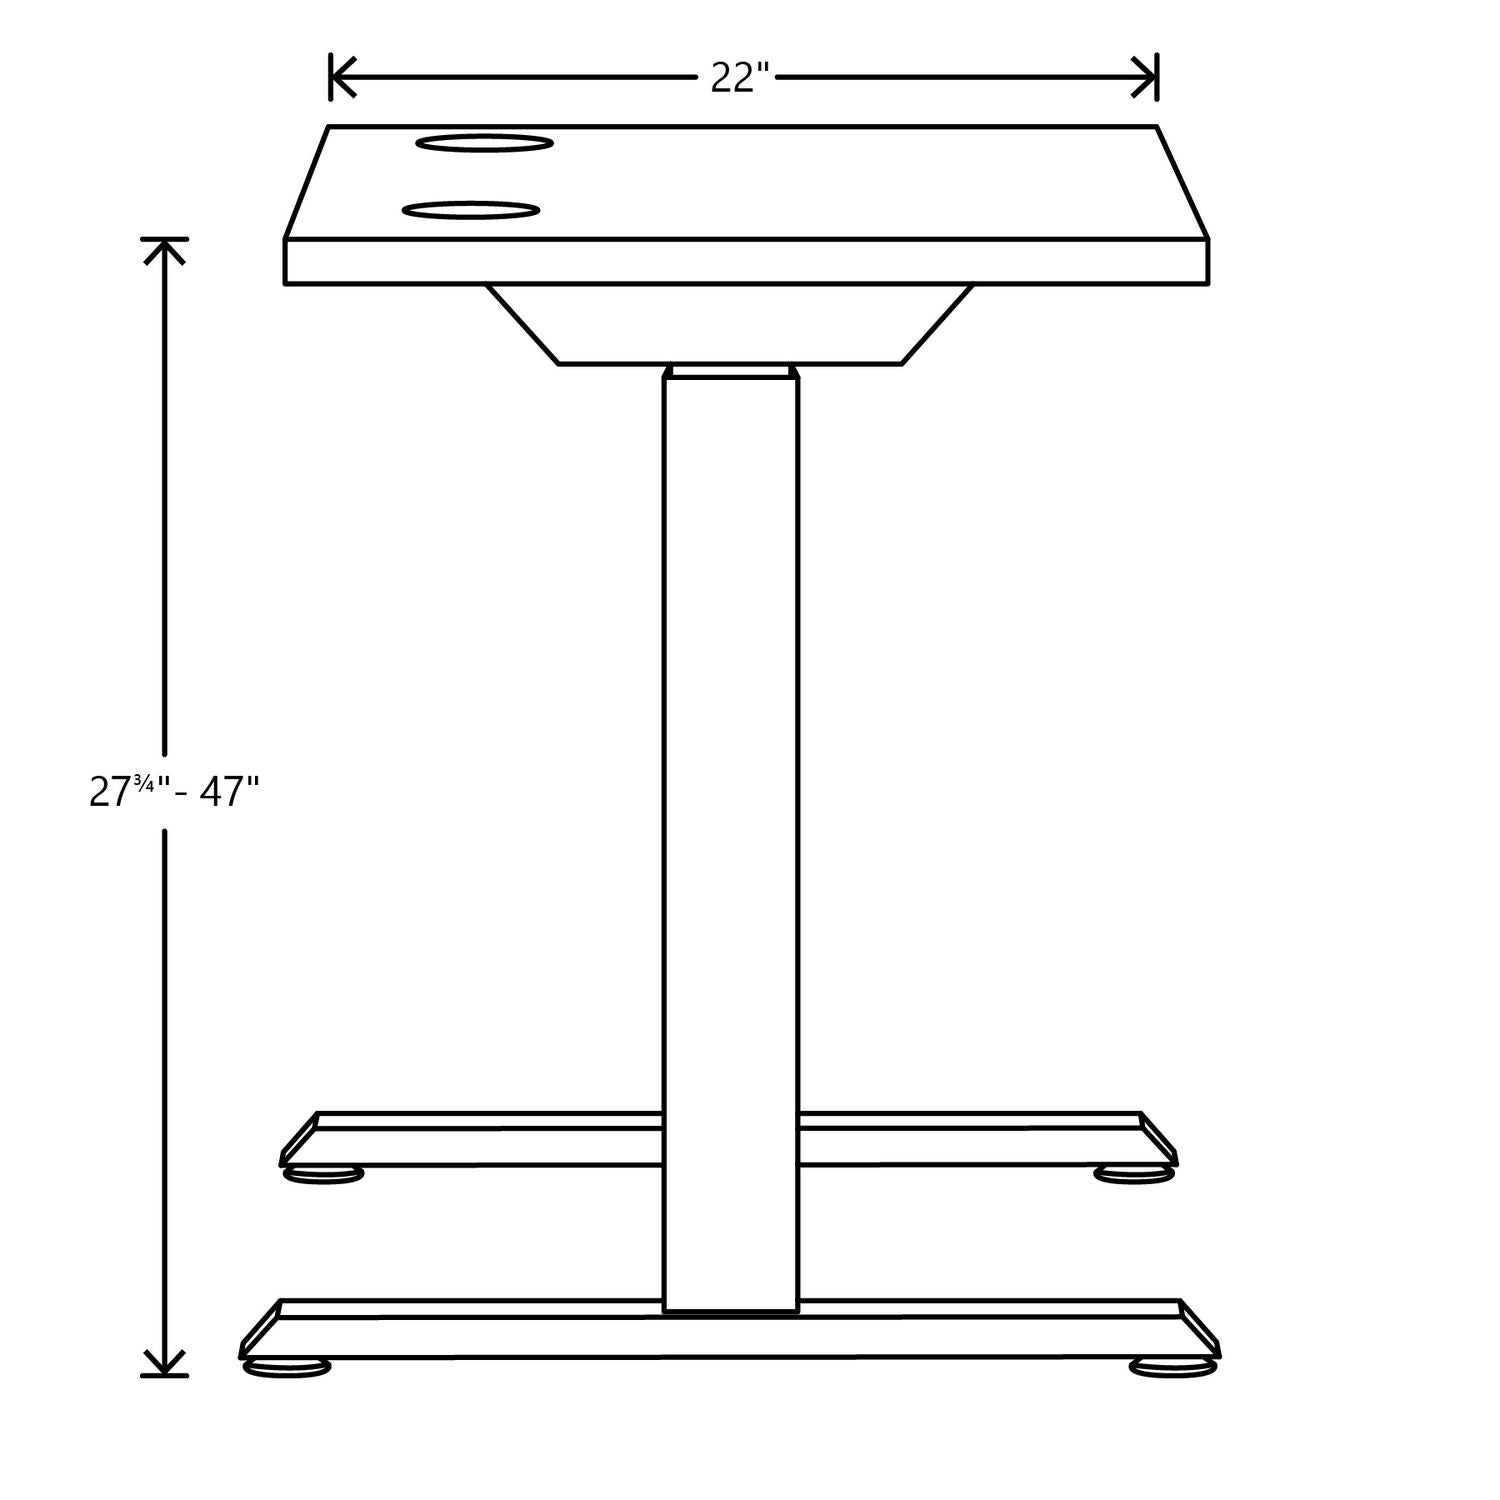 coordinate-height-adjustable-desk-bundle-2-stage-46-x-22-x-2775-to-47-silver-mesh\\silver-ships-in-7-10-business-days_honhat2smsv2246 - 6